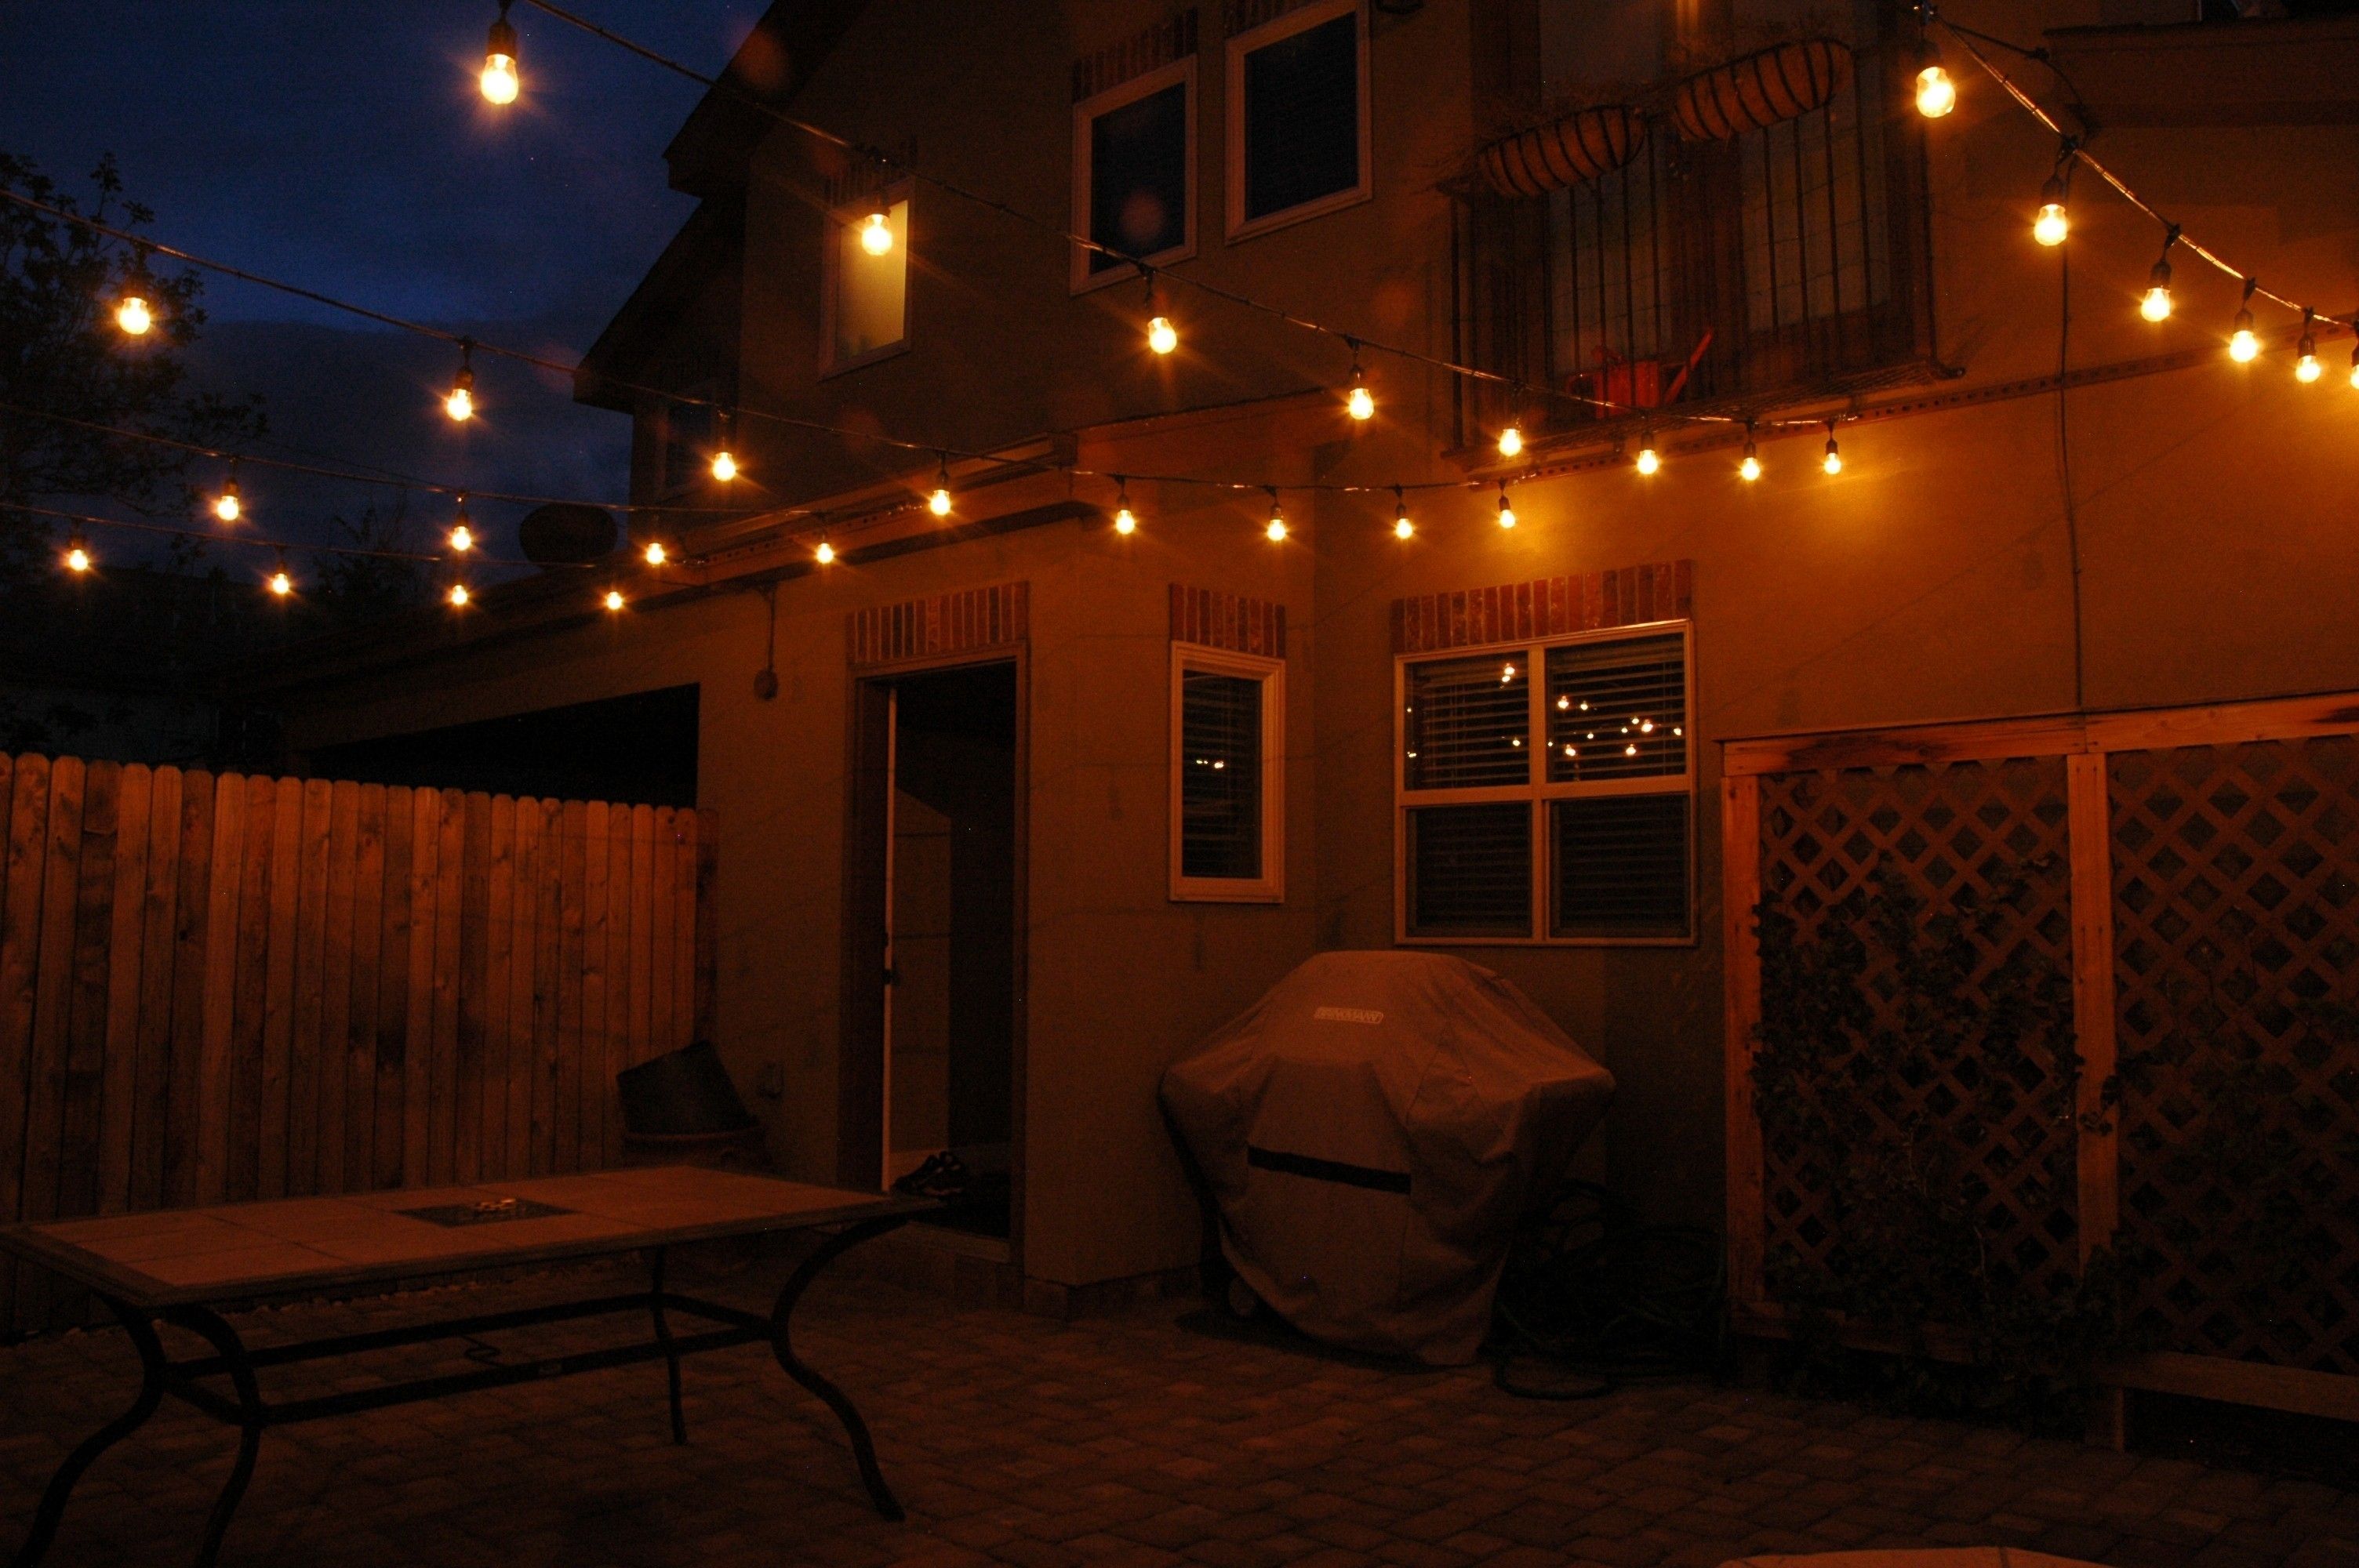 Hanging Outdoor String Lights Home Depot | Interior Design Inside Hanging Outdoor String Lights At Home Depot (View 6 of 15)